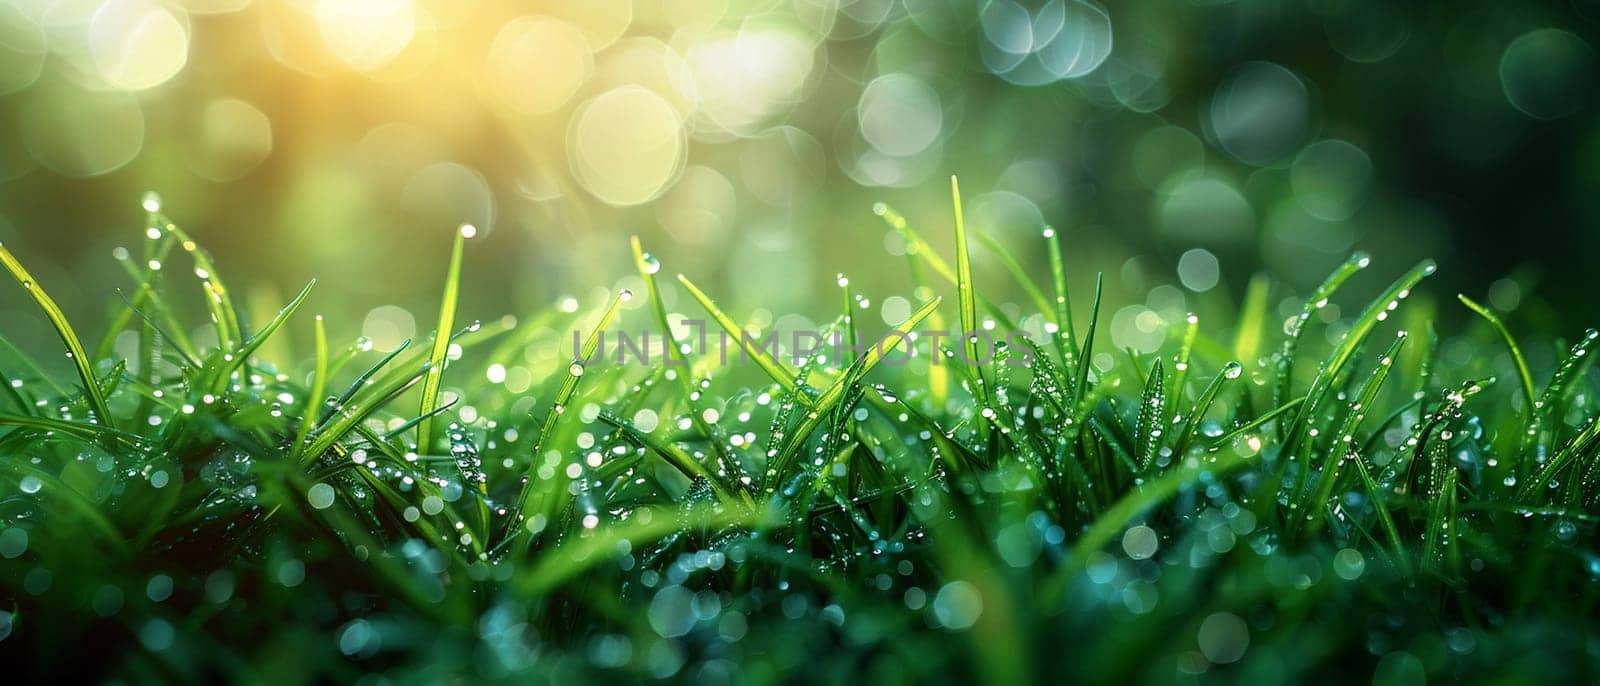 Fresh spring grass with morning dew, perfect for renewal and nature-inspired designs.